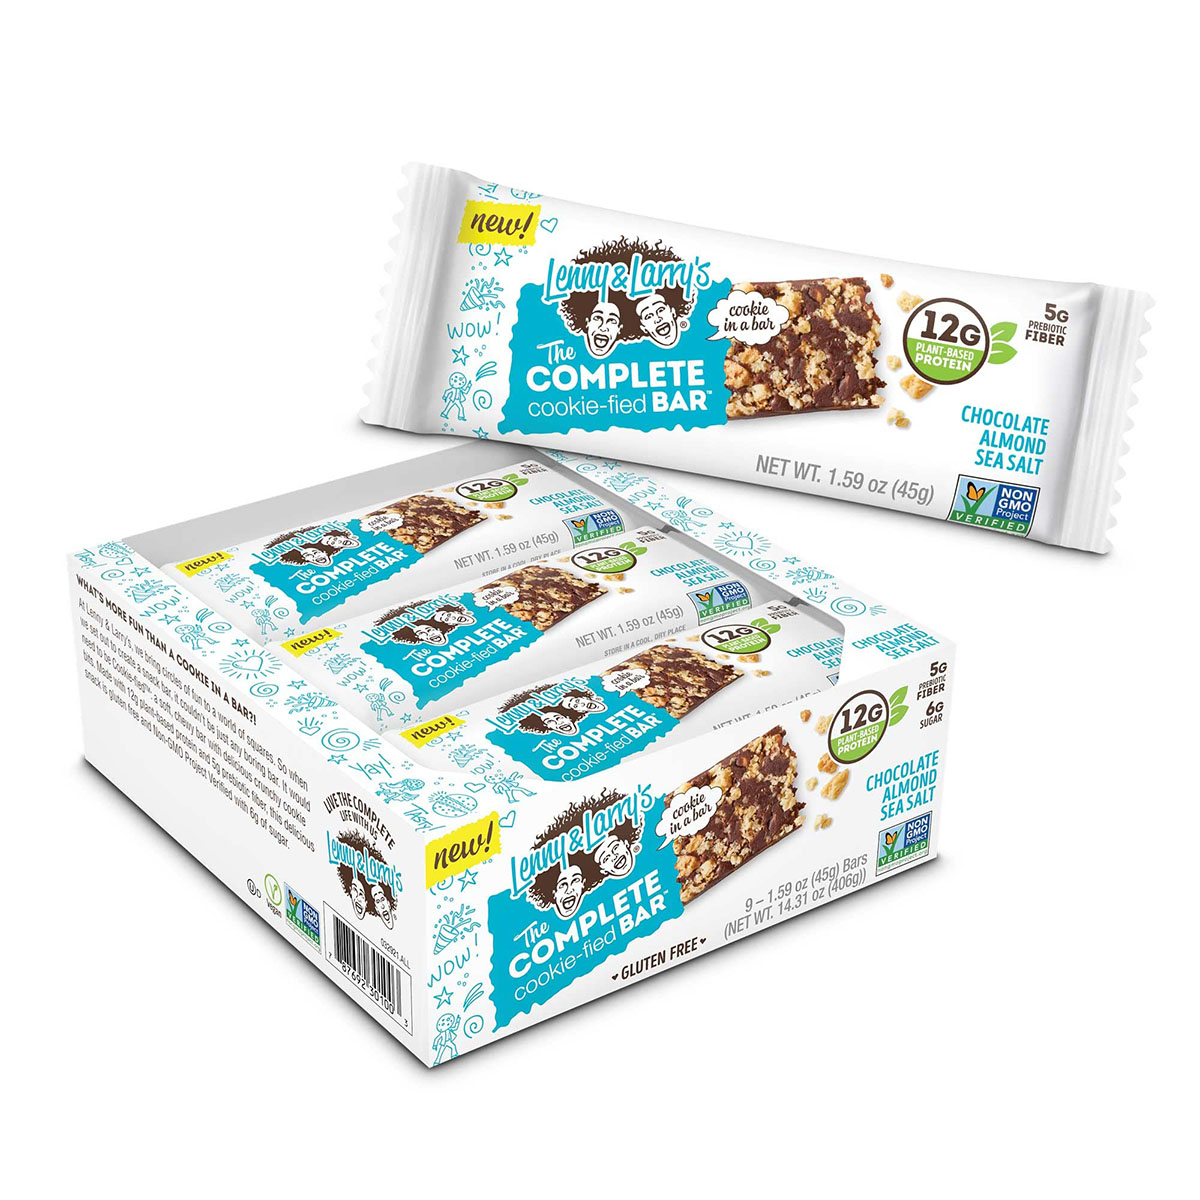 Lenny & Larry’s The Complete Cookie-fied Bar, Box of 9 Bars, Chocolate Almond Sea Salt